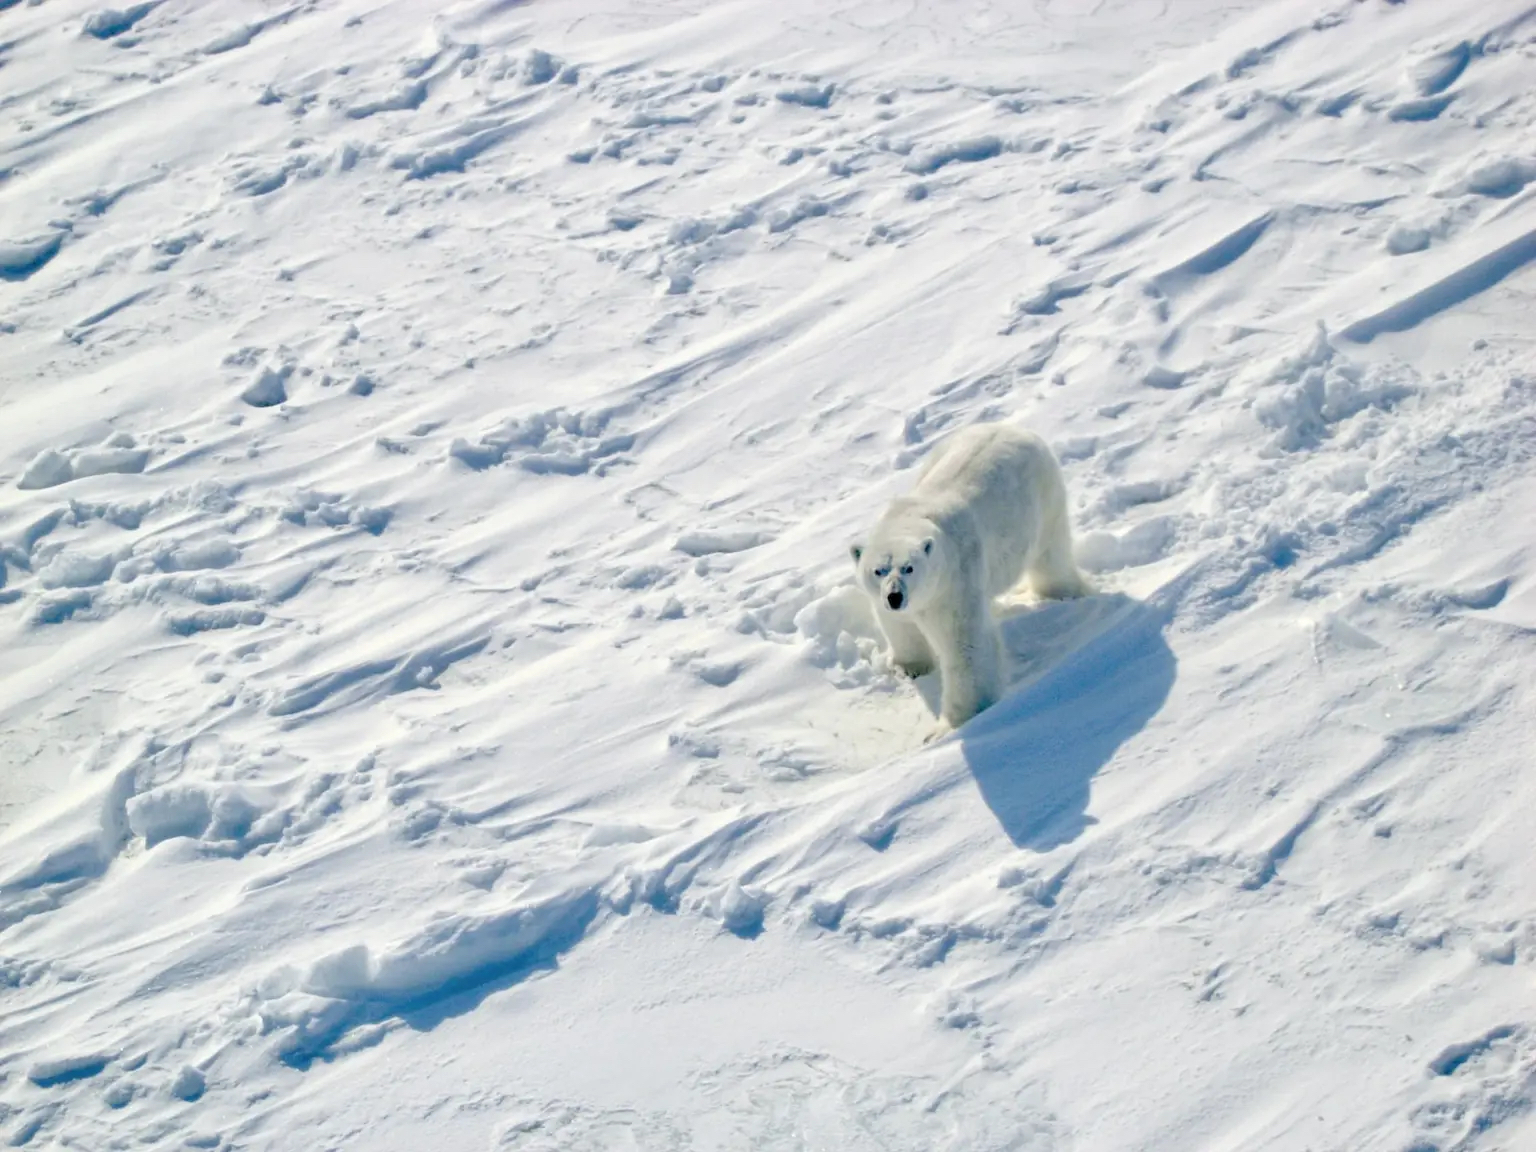 Climate change: Polar bears face starvation threat as ice melts